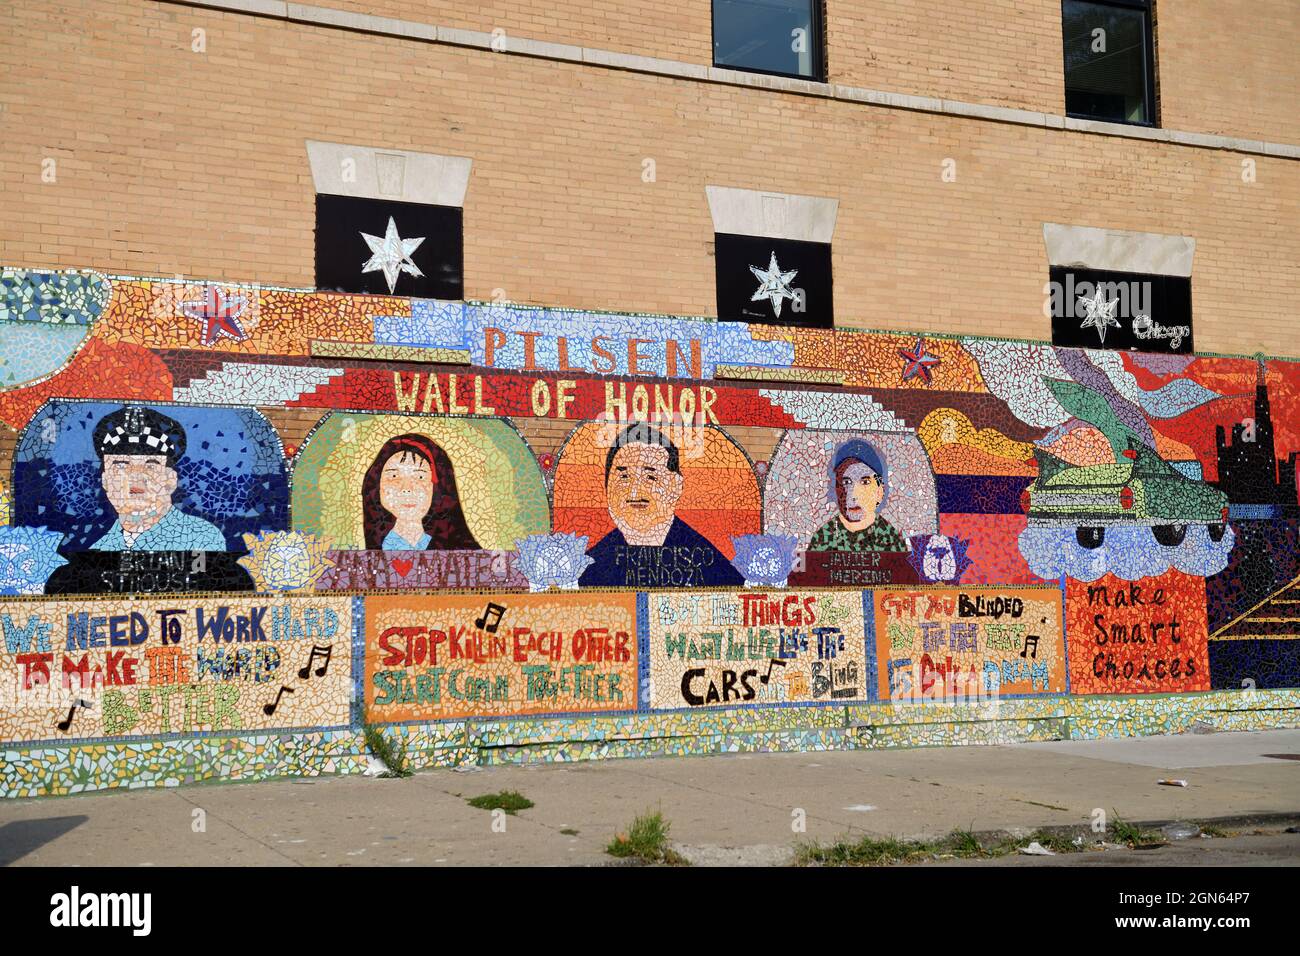 Chicago, Illinois, USA. Colorful mosaic tile mural applied to the side of a building in the Pilsen neighborhood on the city's South Side. Stock Photo